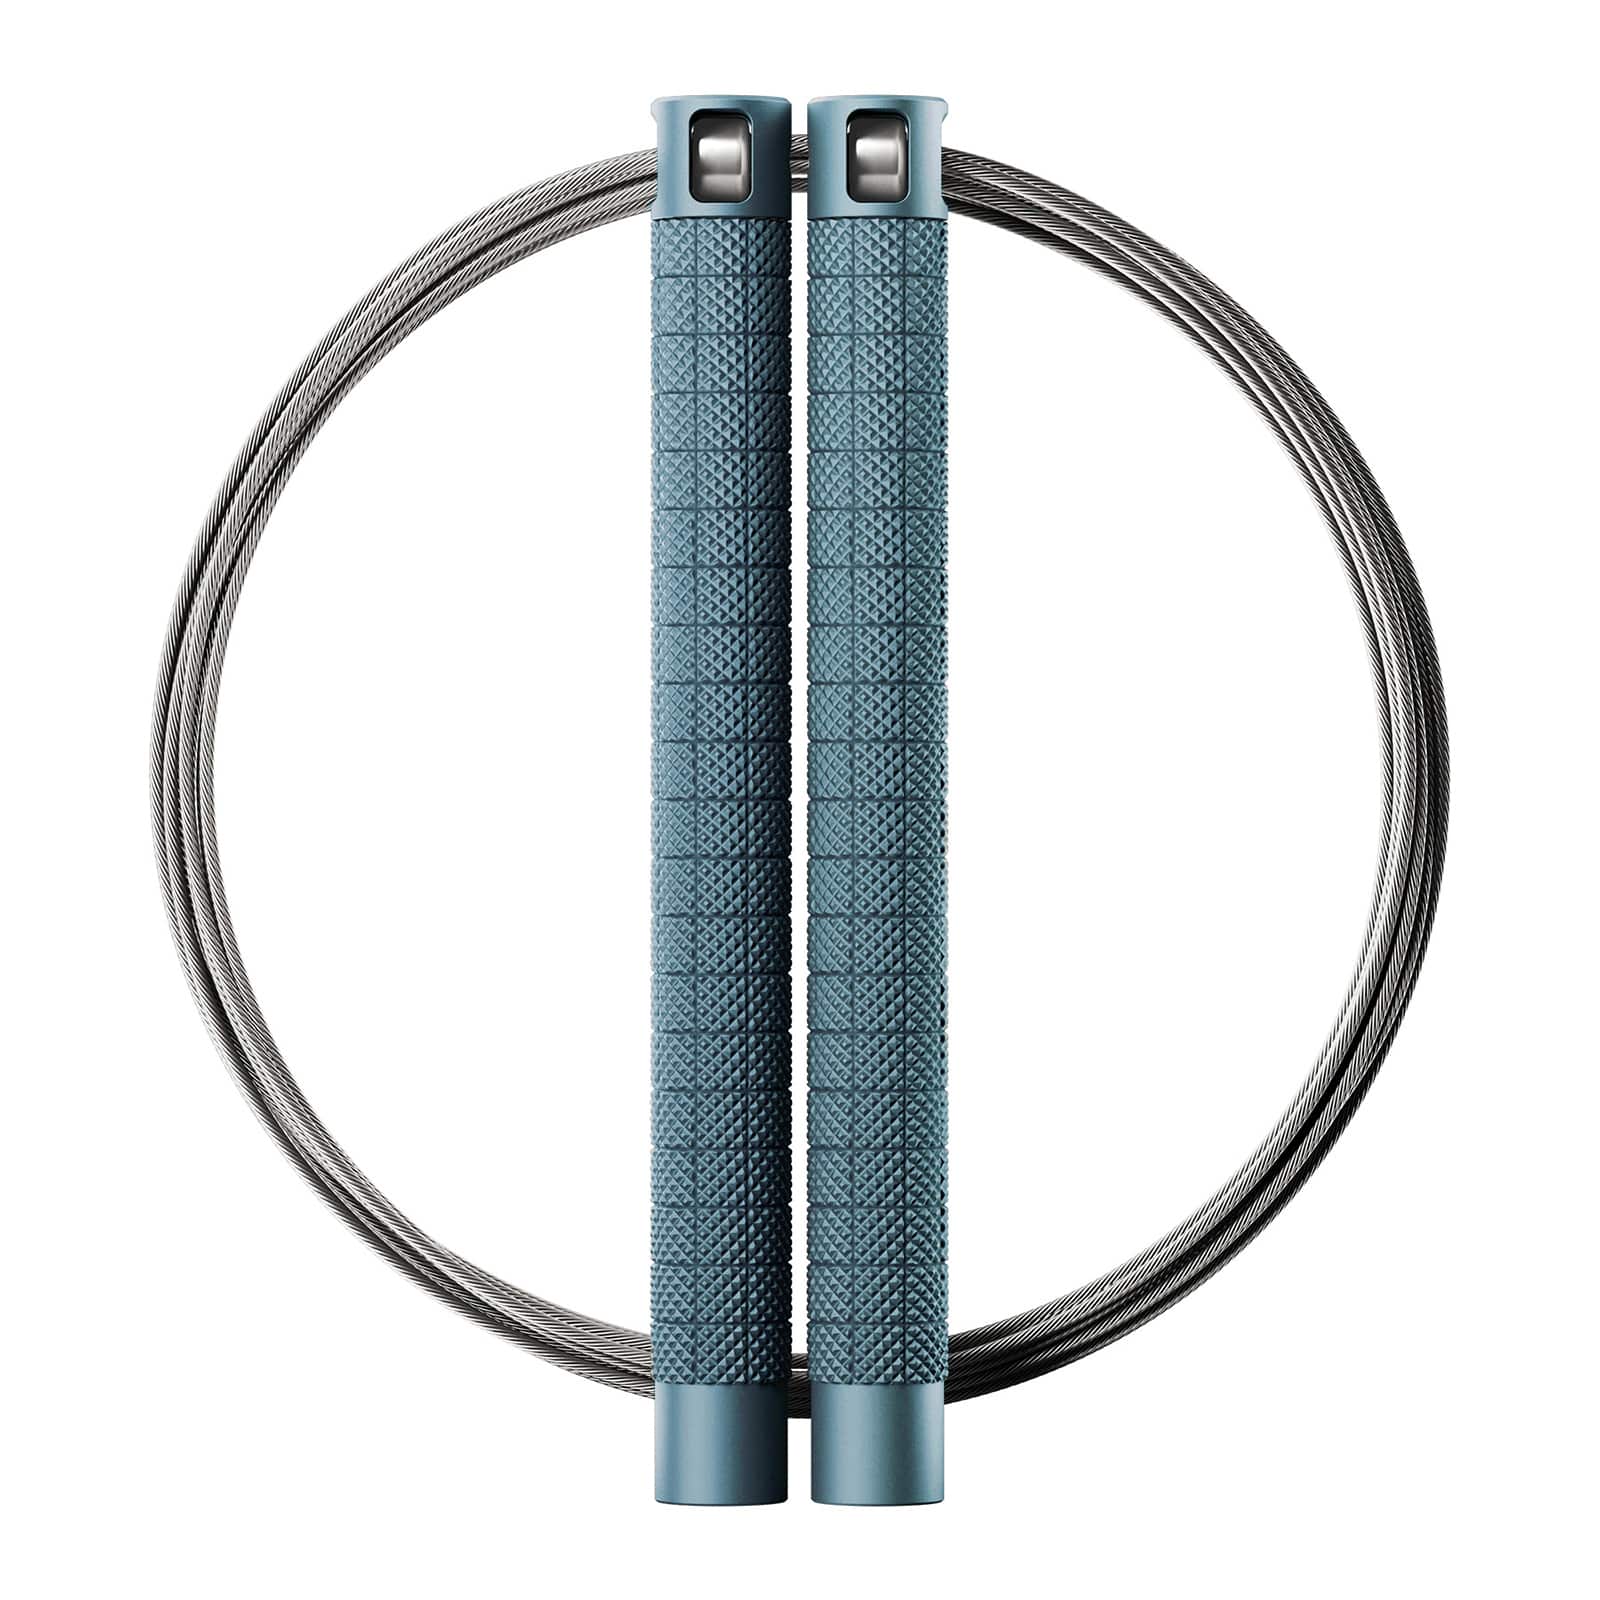 RPM Speed Rope - Comp4